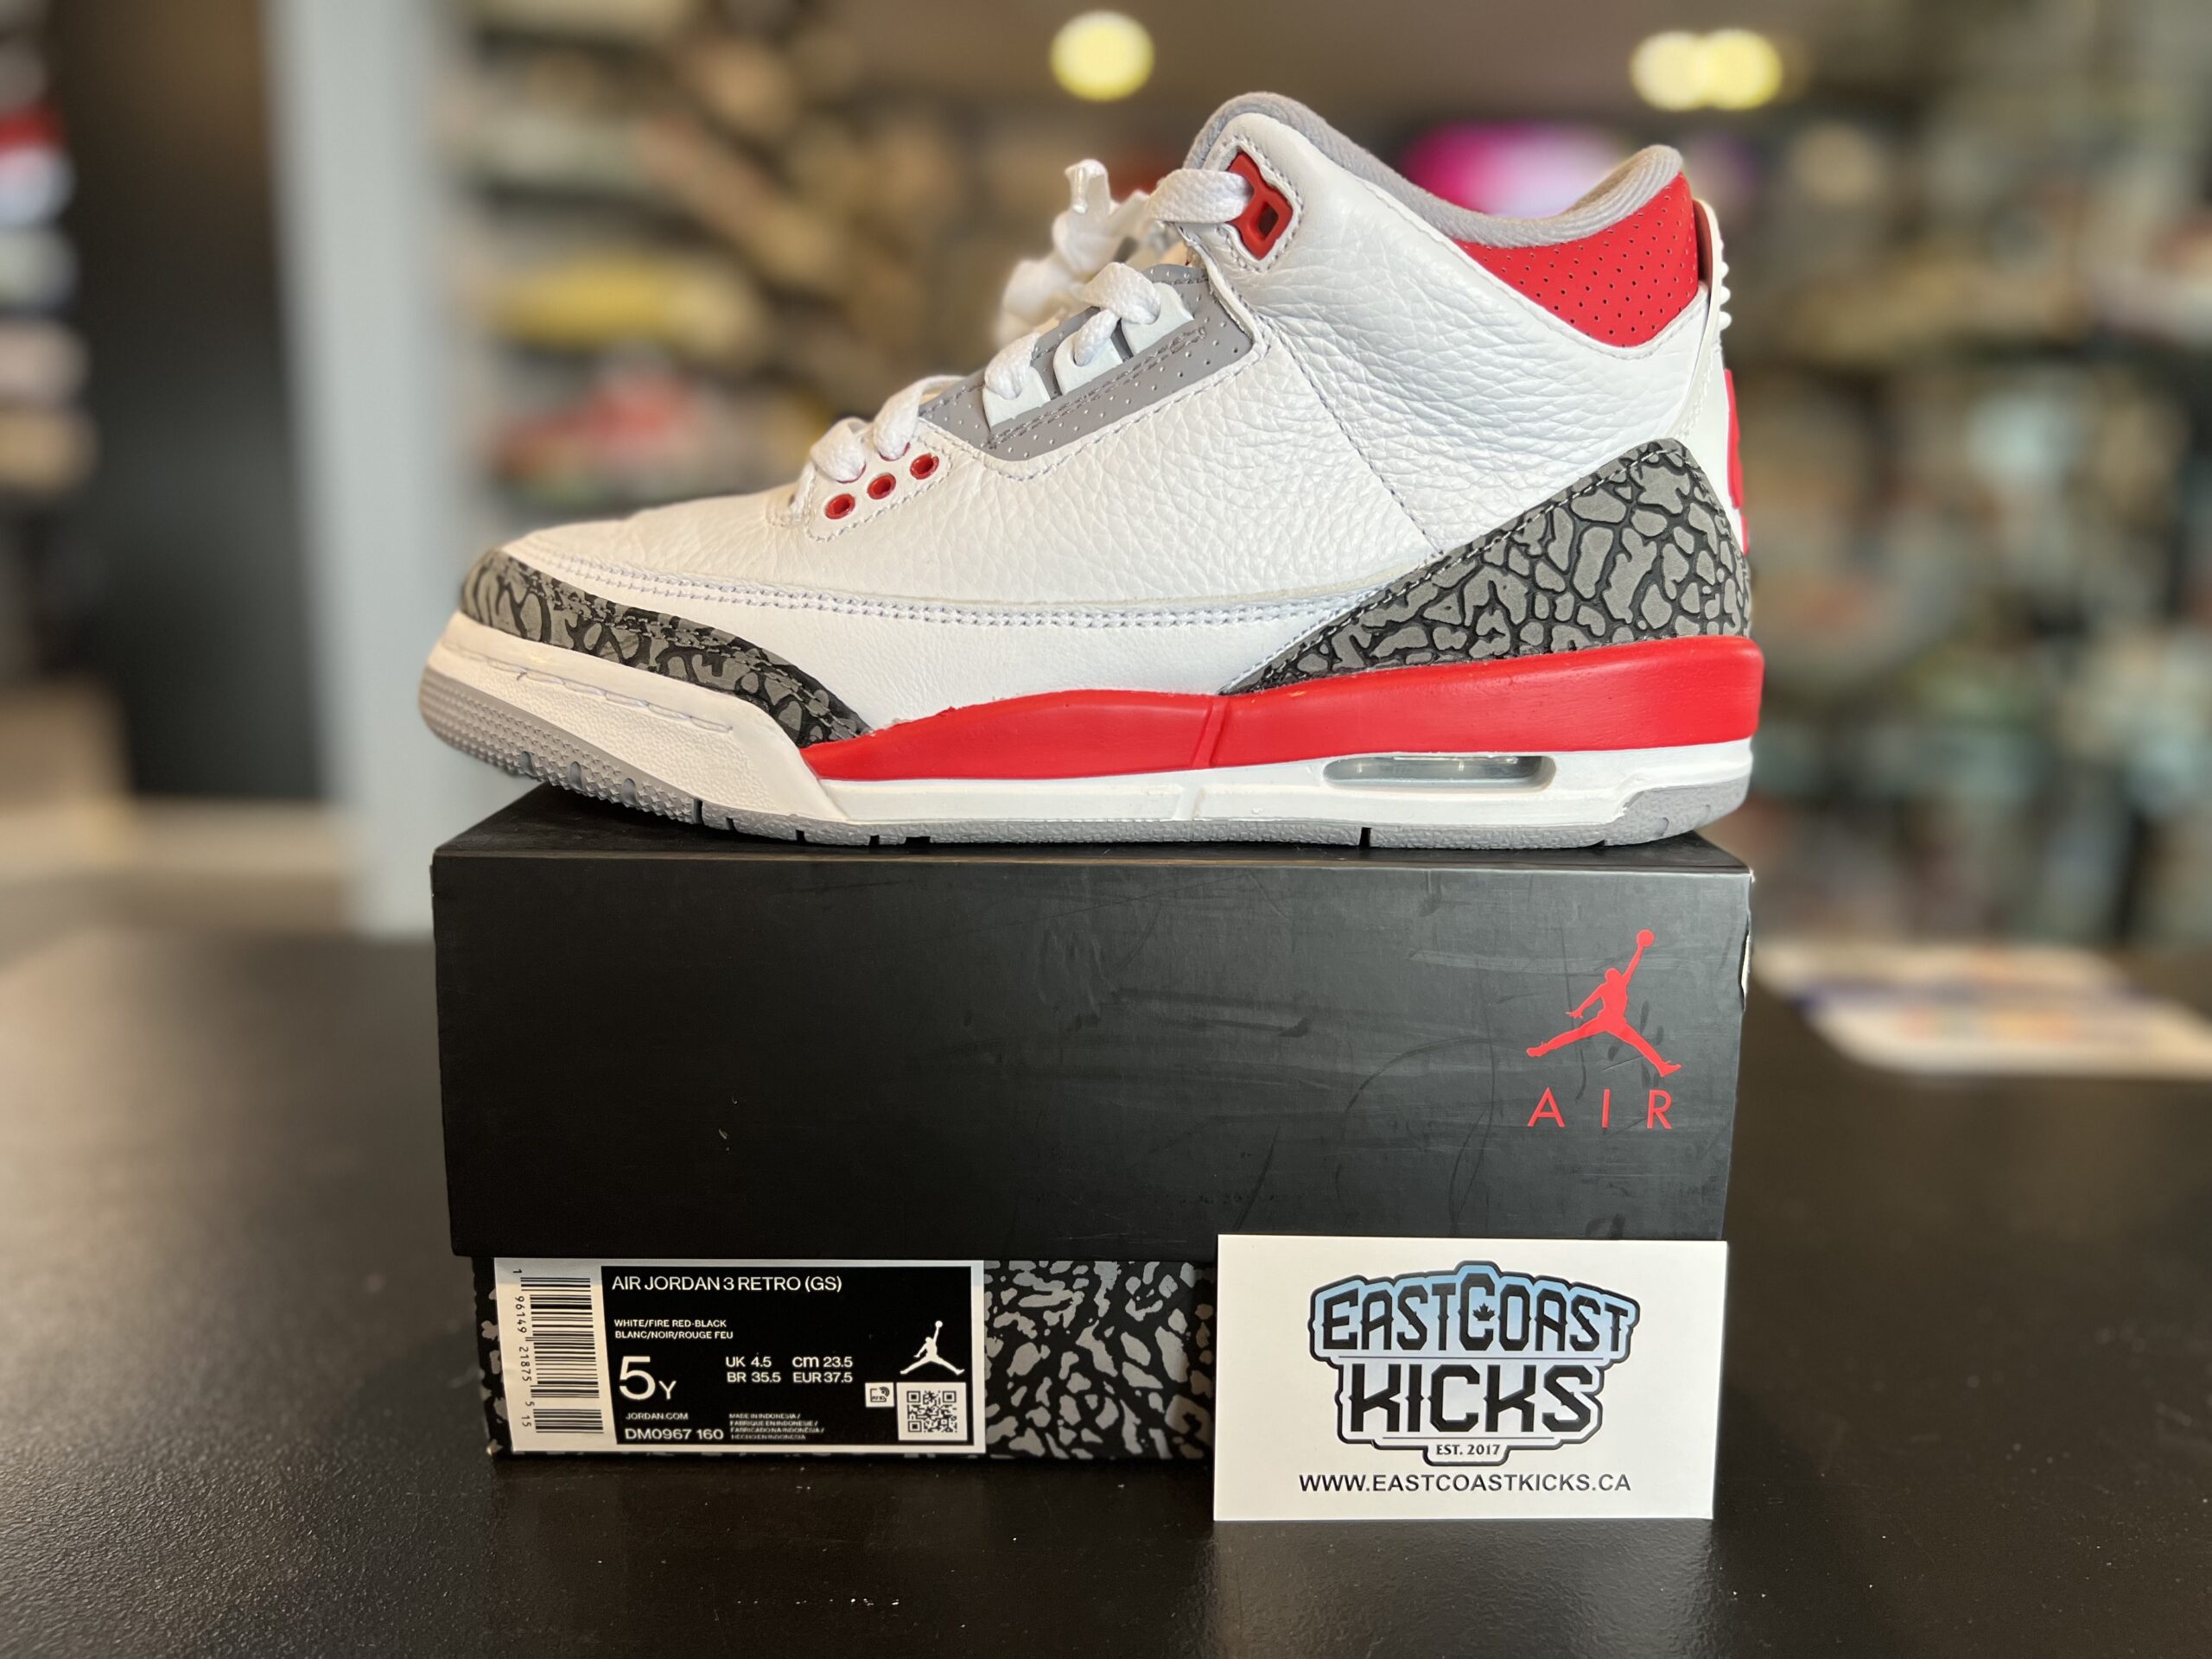 Preowned Jordan 3 Retro Fire Red Size 5Y